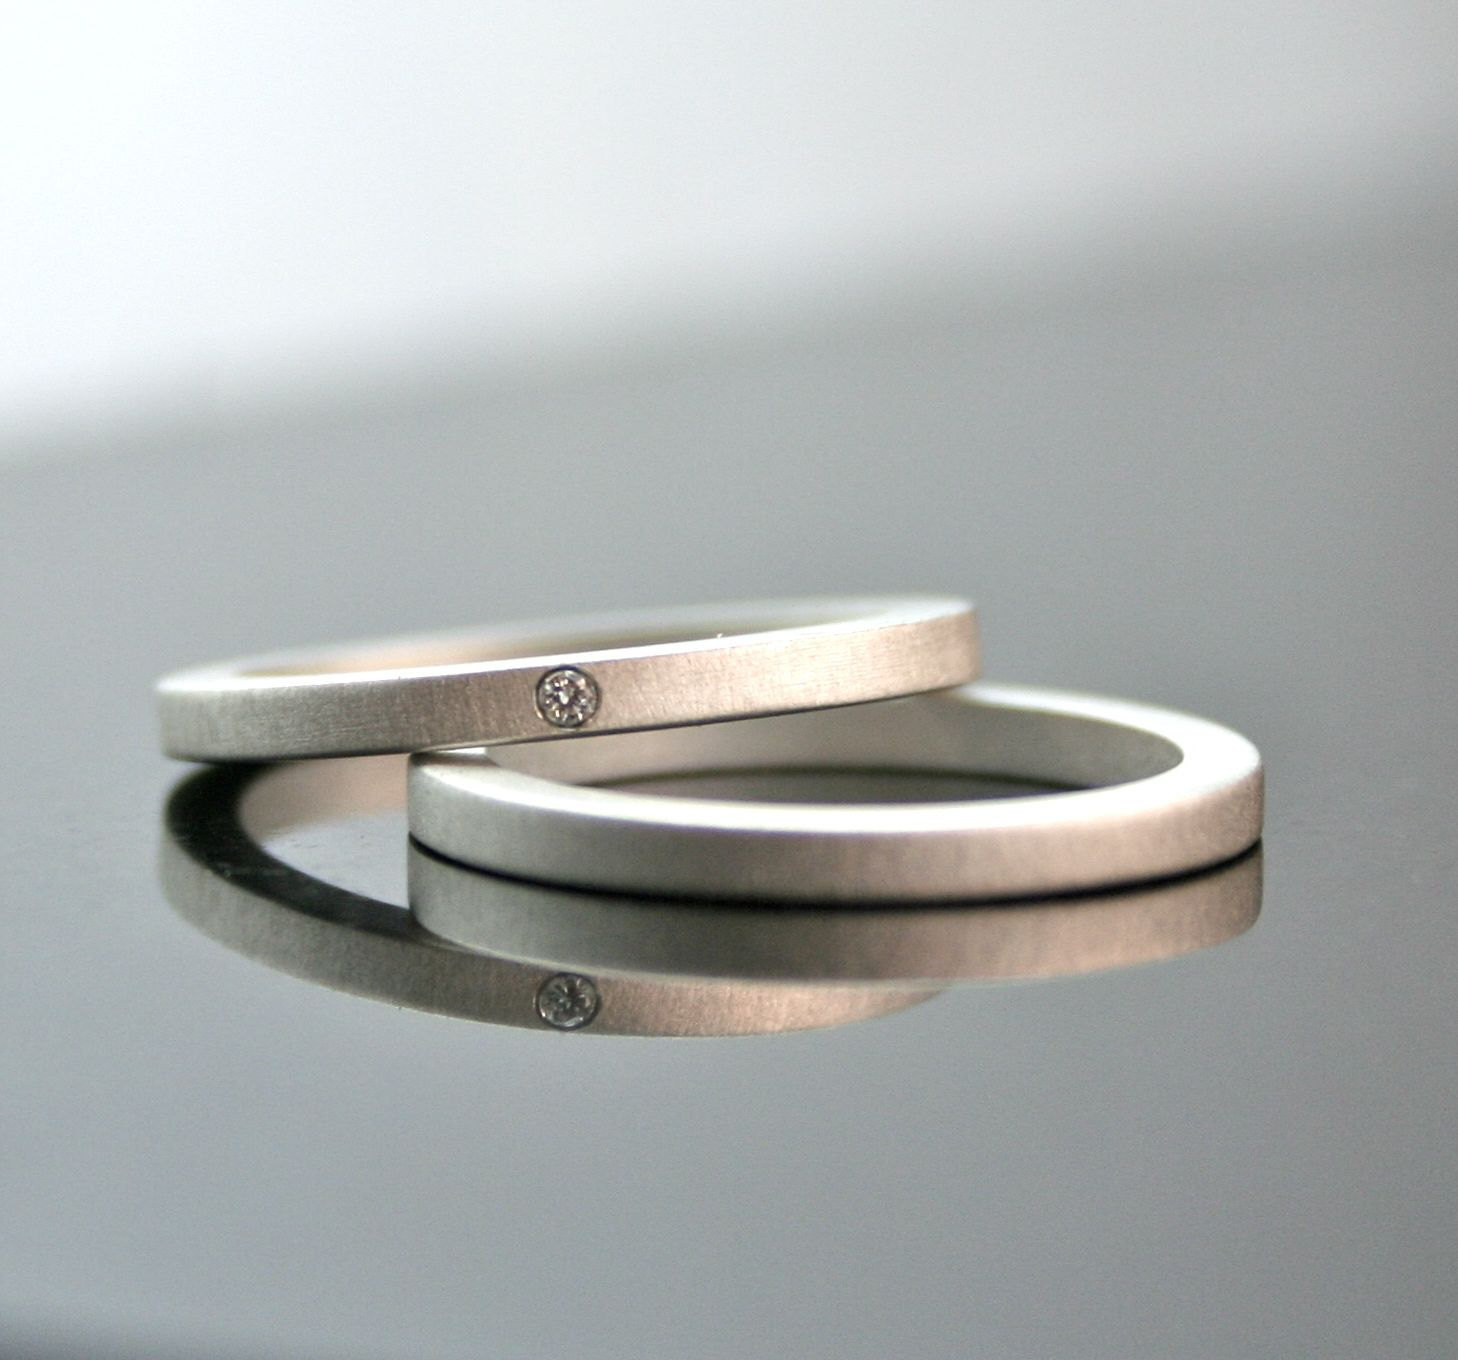 Simple Wedding Ring Sets
 e Tiny Diamond Ring Set Simple Wedding Rings by CocoandChia